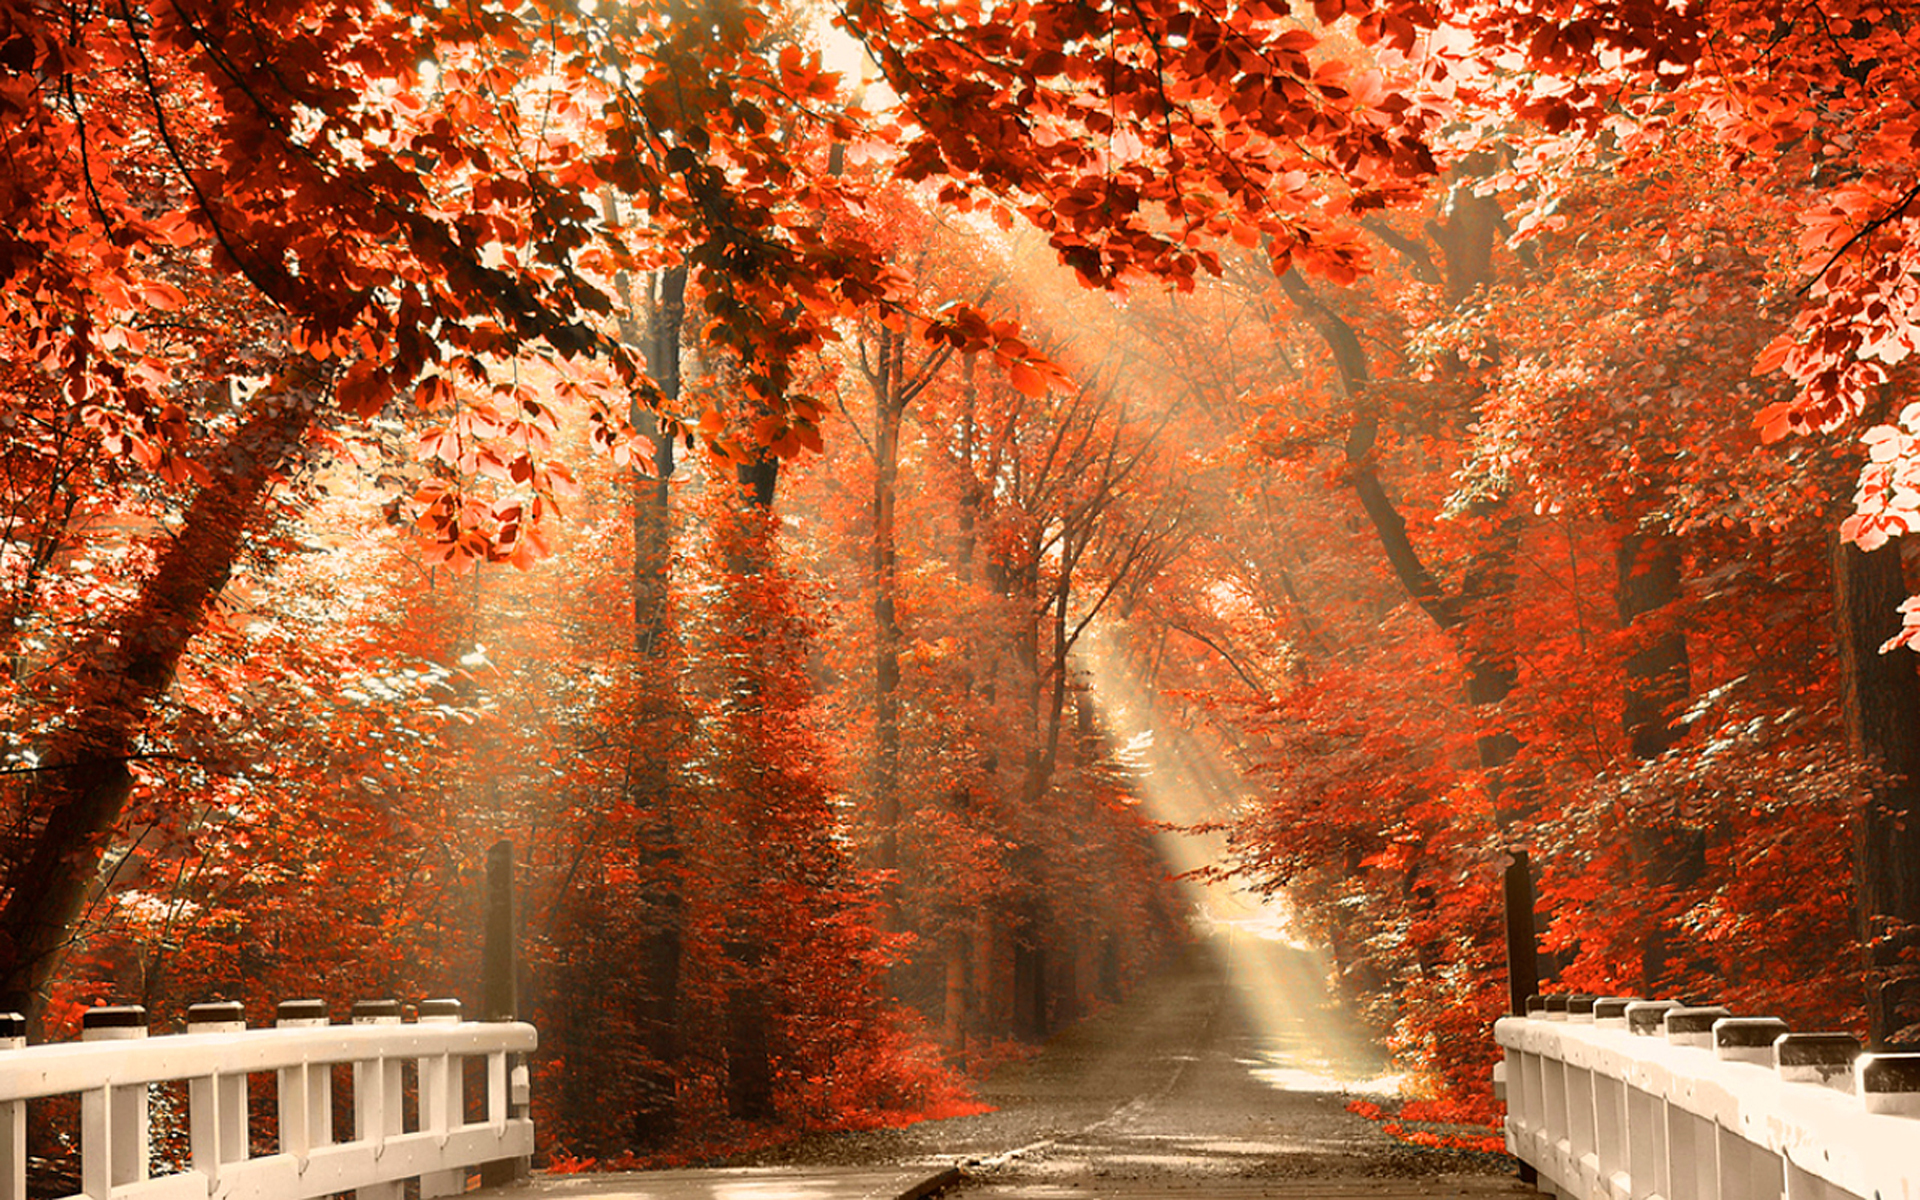 Autumn Background Wallpaper Win10 Themes